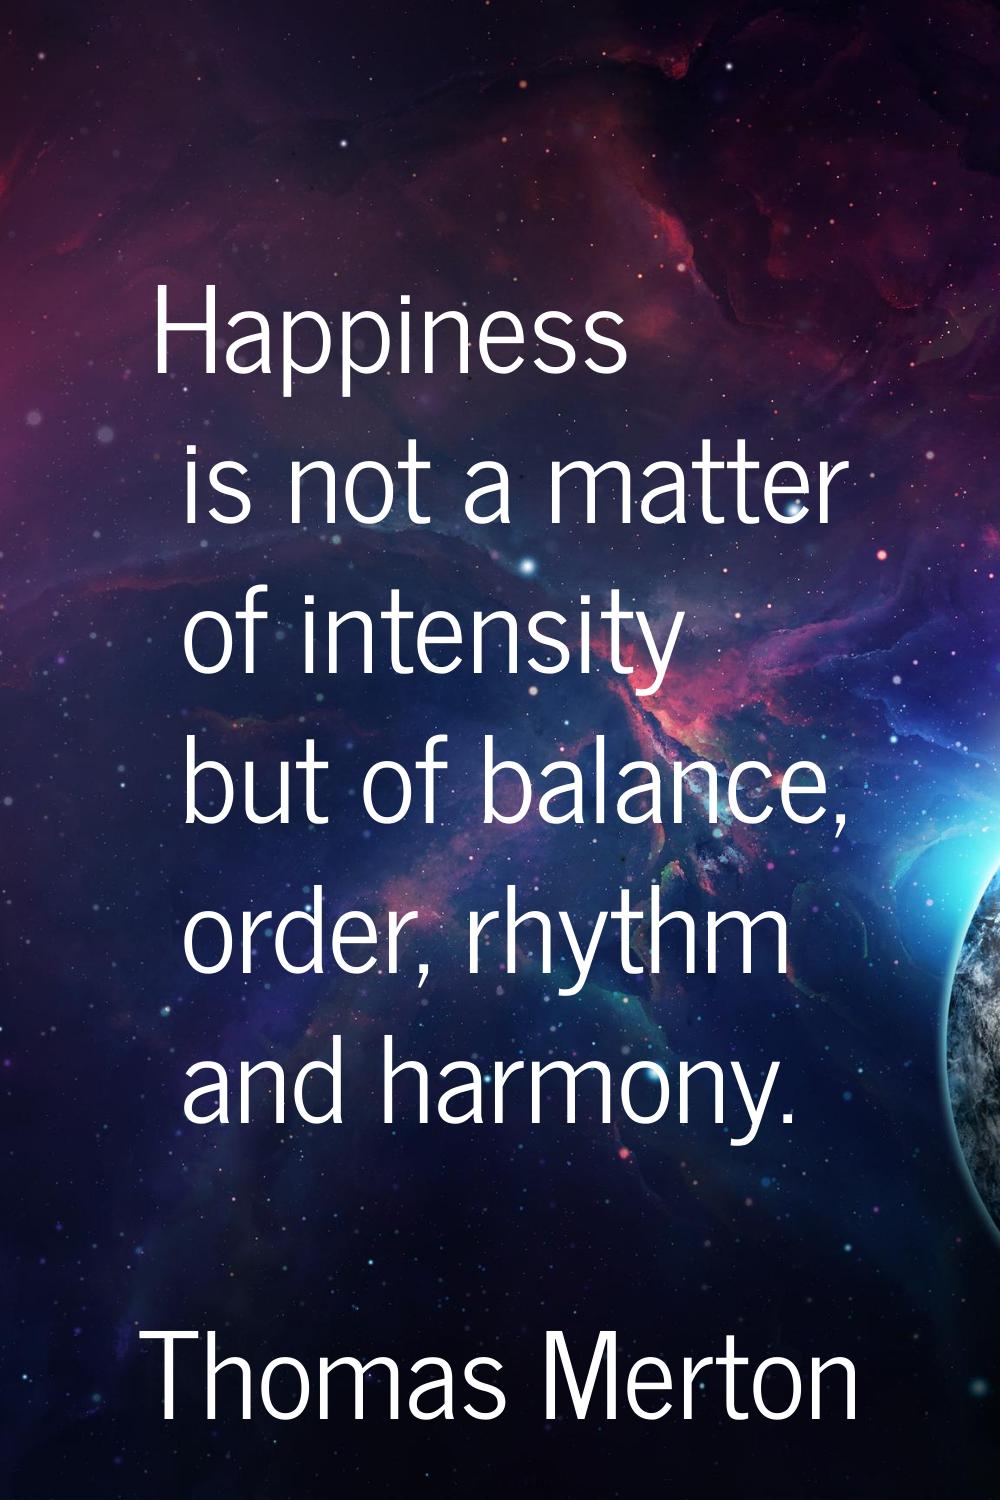 Happiness is not a matter of intensity but of balance, order, rhythm and harmony.